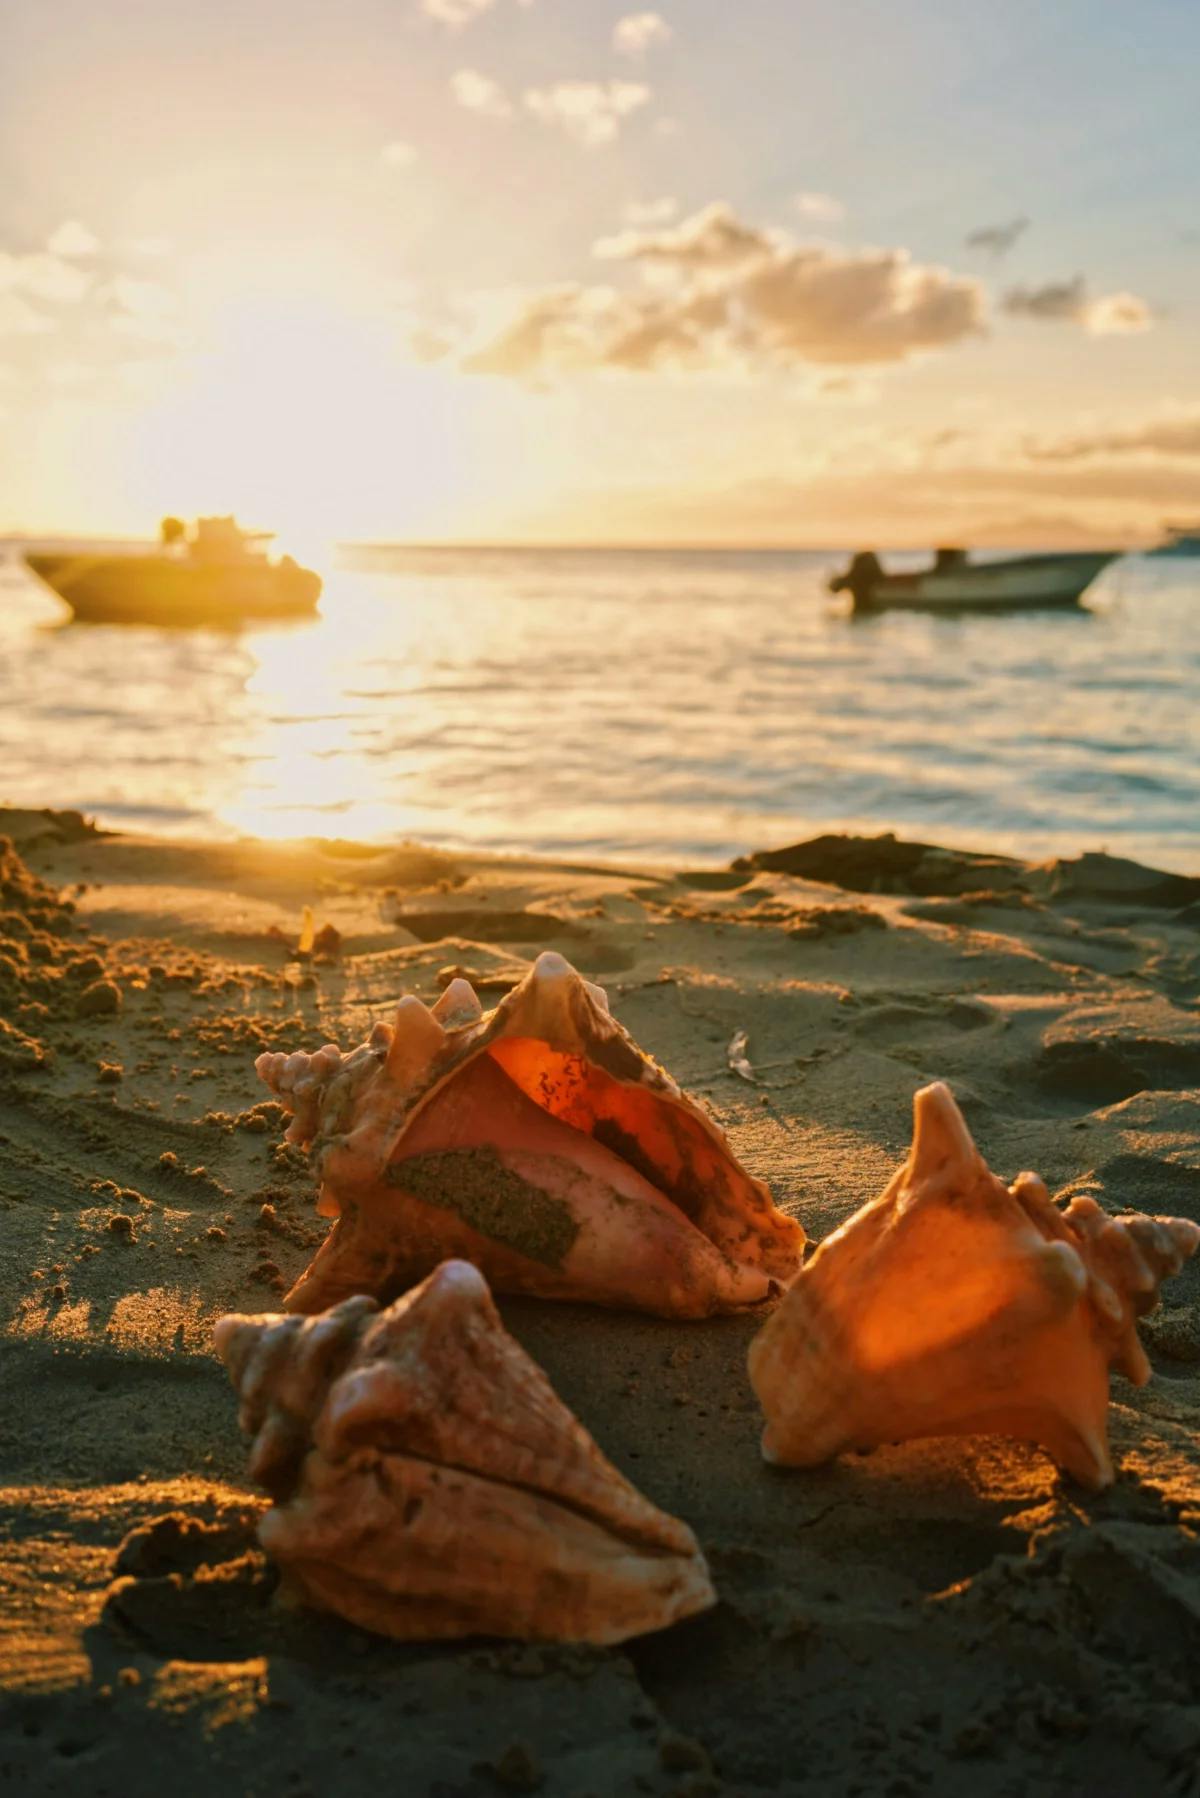 A close-up shot of seashells on the beach at sunset, with fishing boats in the background.